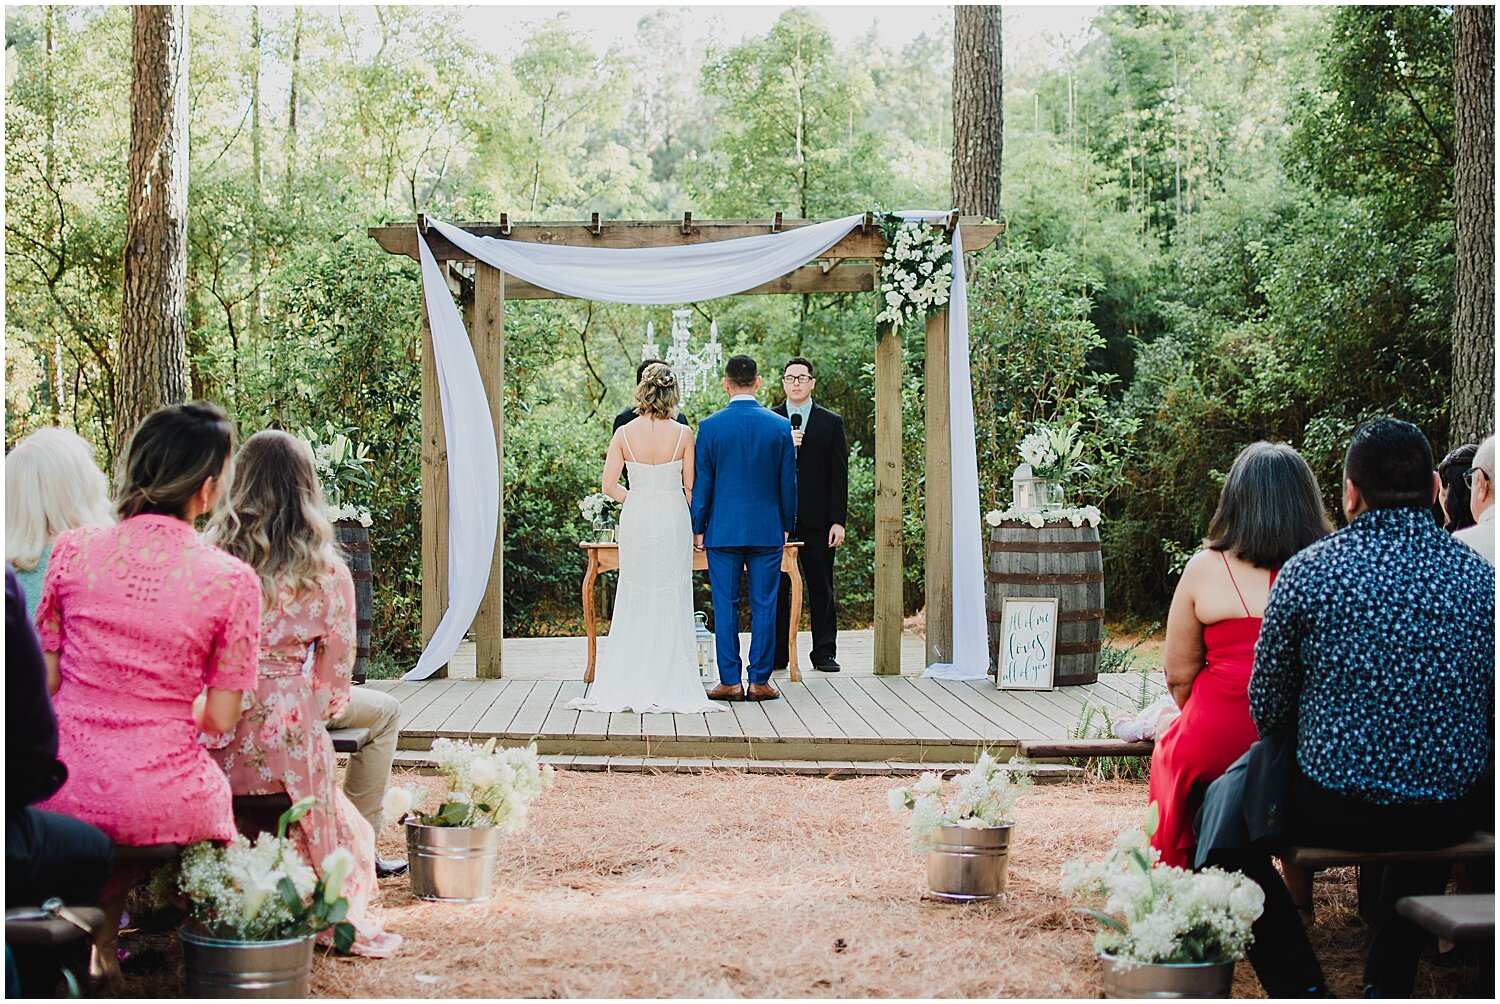  bride and groom during their outdoor wedding ceremony 